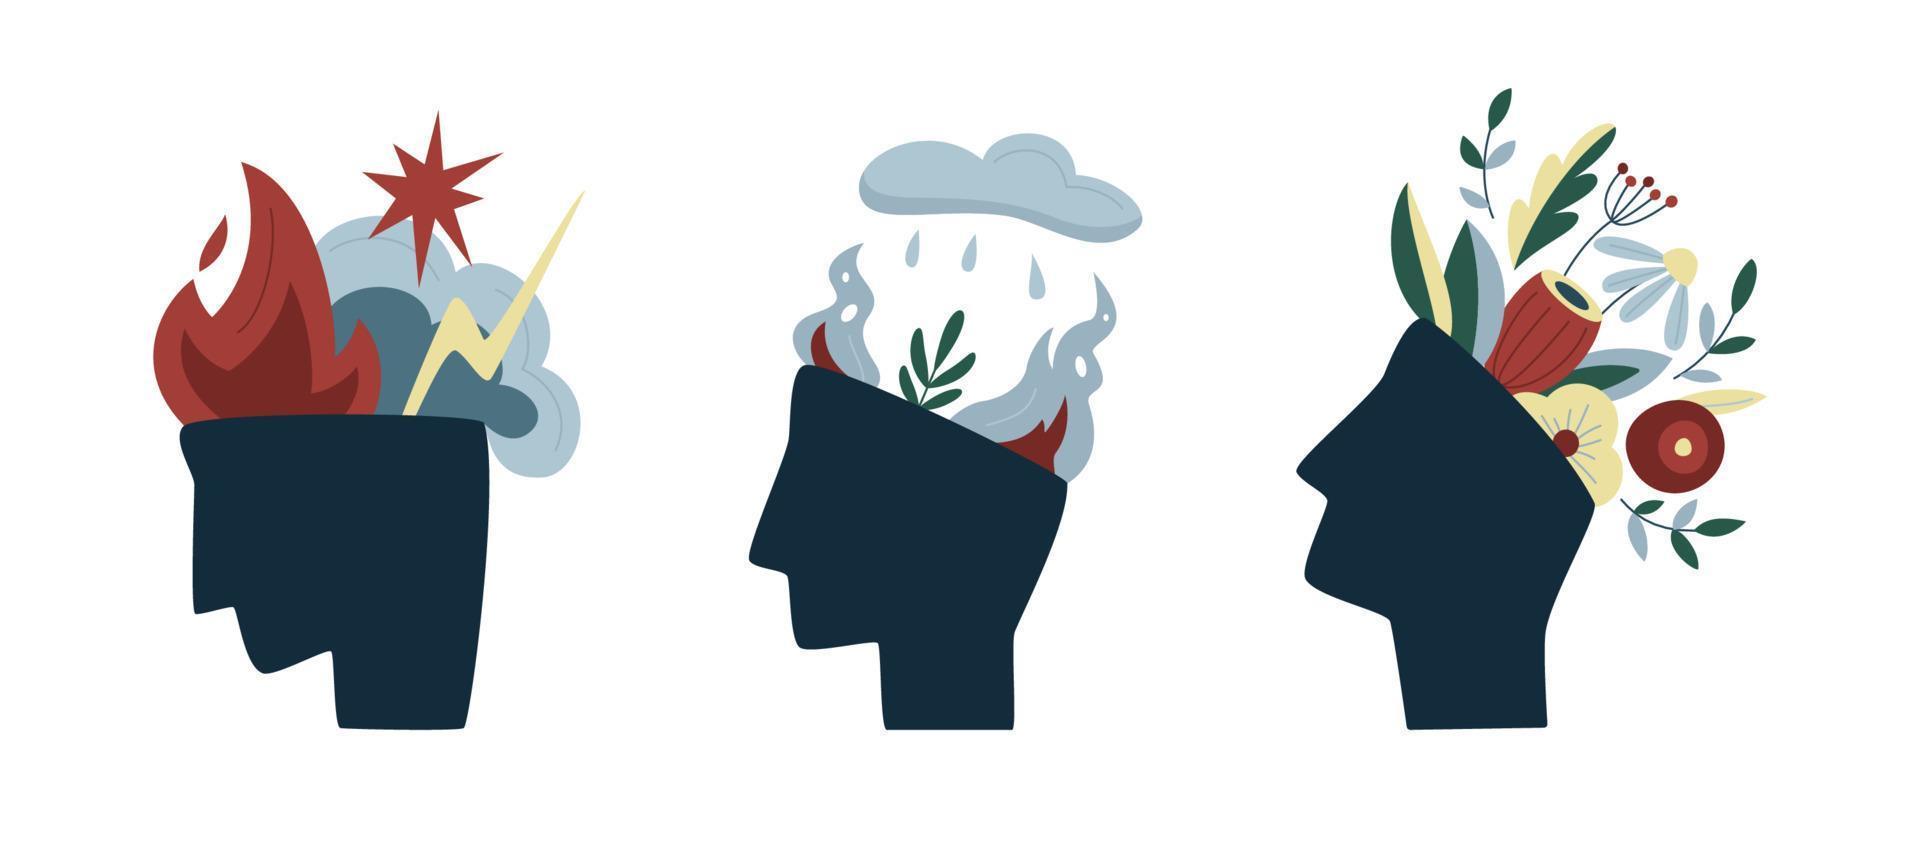 Set of mental states illustrations. Mental health weather concept. Mental disorder, illness and happiness creative abstract concept. Set of isolated vector illustrations about psychological problems